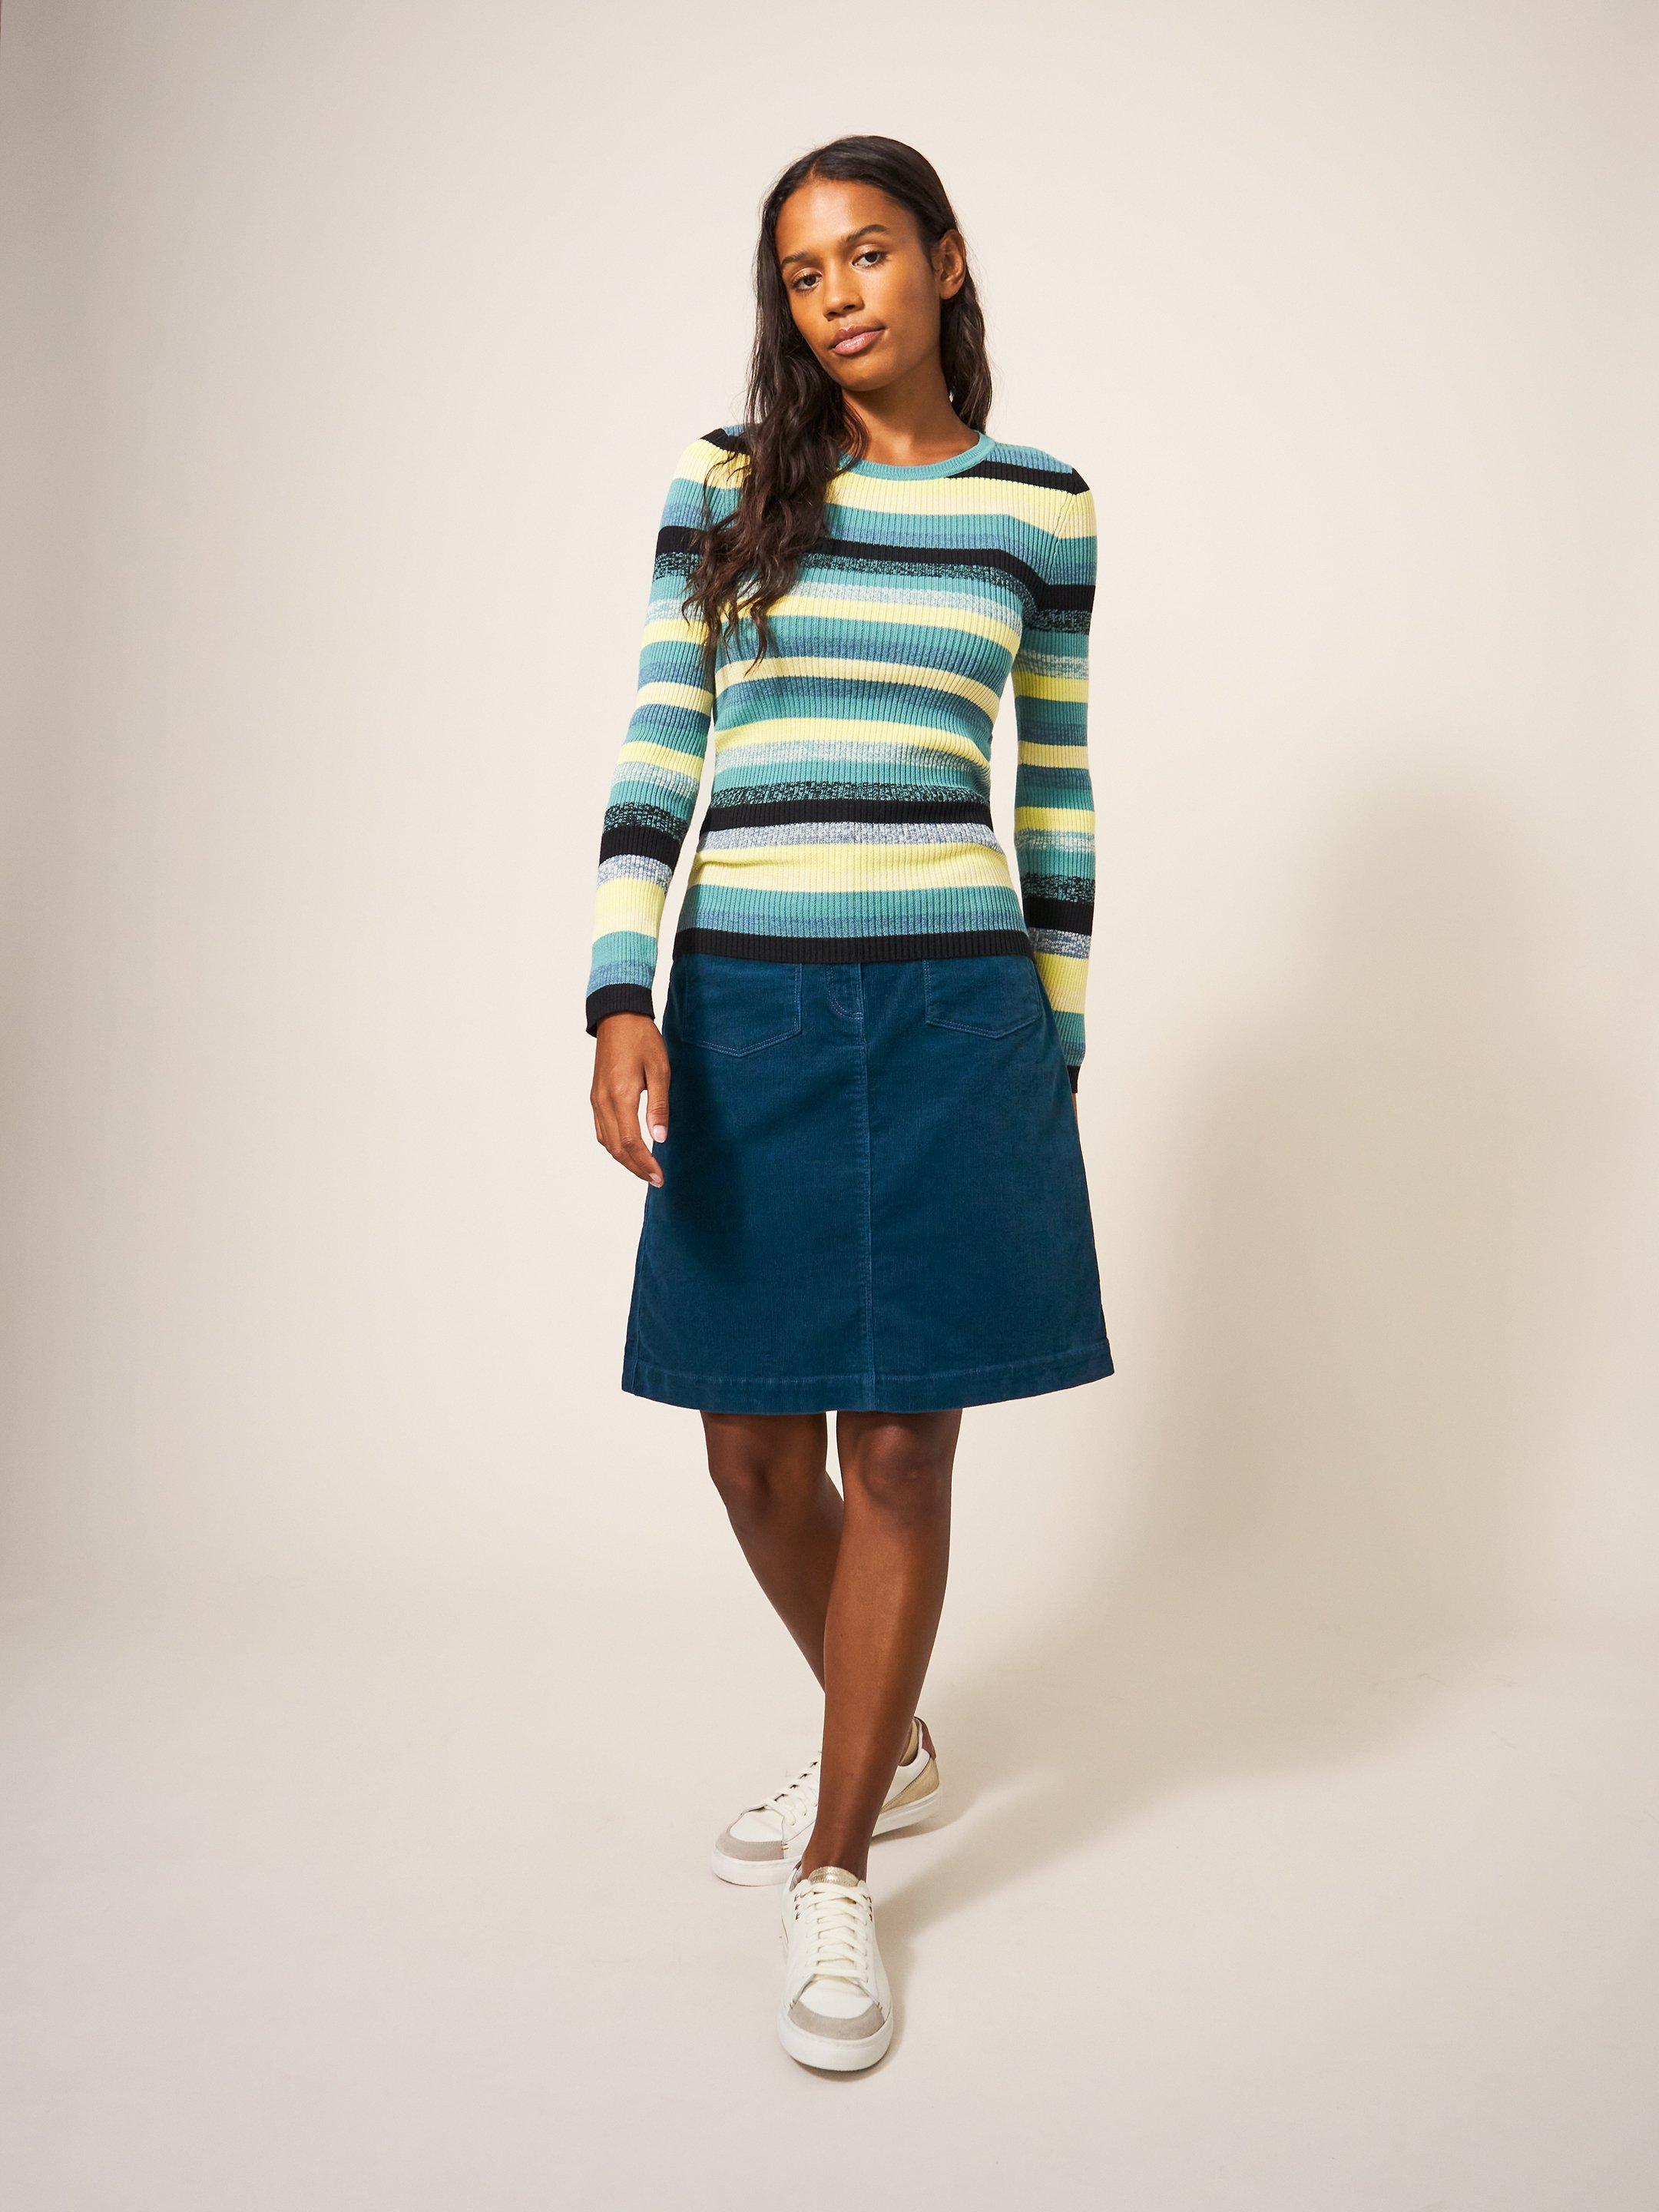 Melody Organic Cord Skirt in DK TEAL - LIFESTYLE